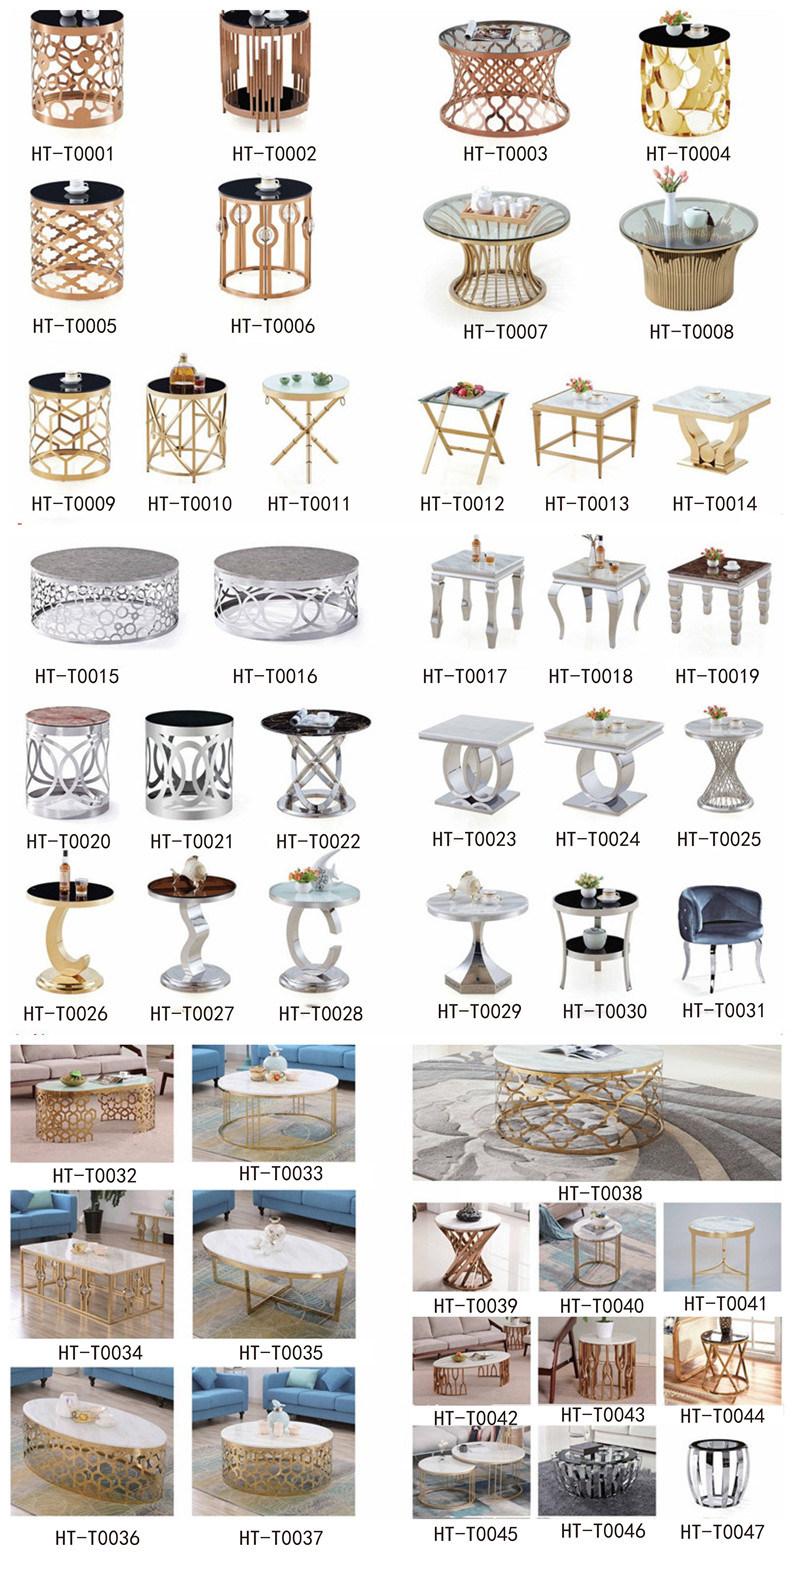 Modern Metal Table Living Room Table / Console Table / Side Table / Stainless Steel Coffee Table / Wood Stool Map Table Tree Pattern Table